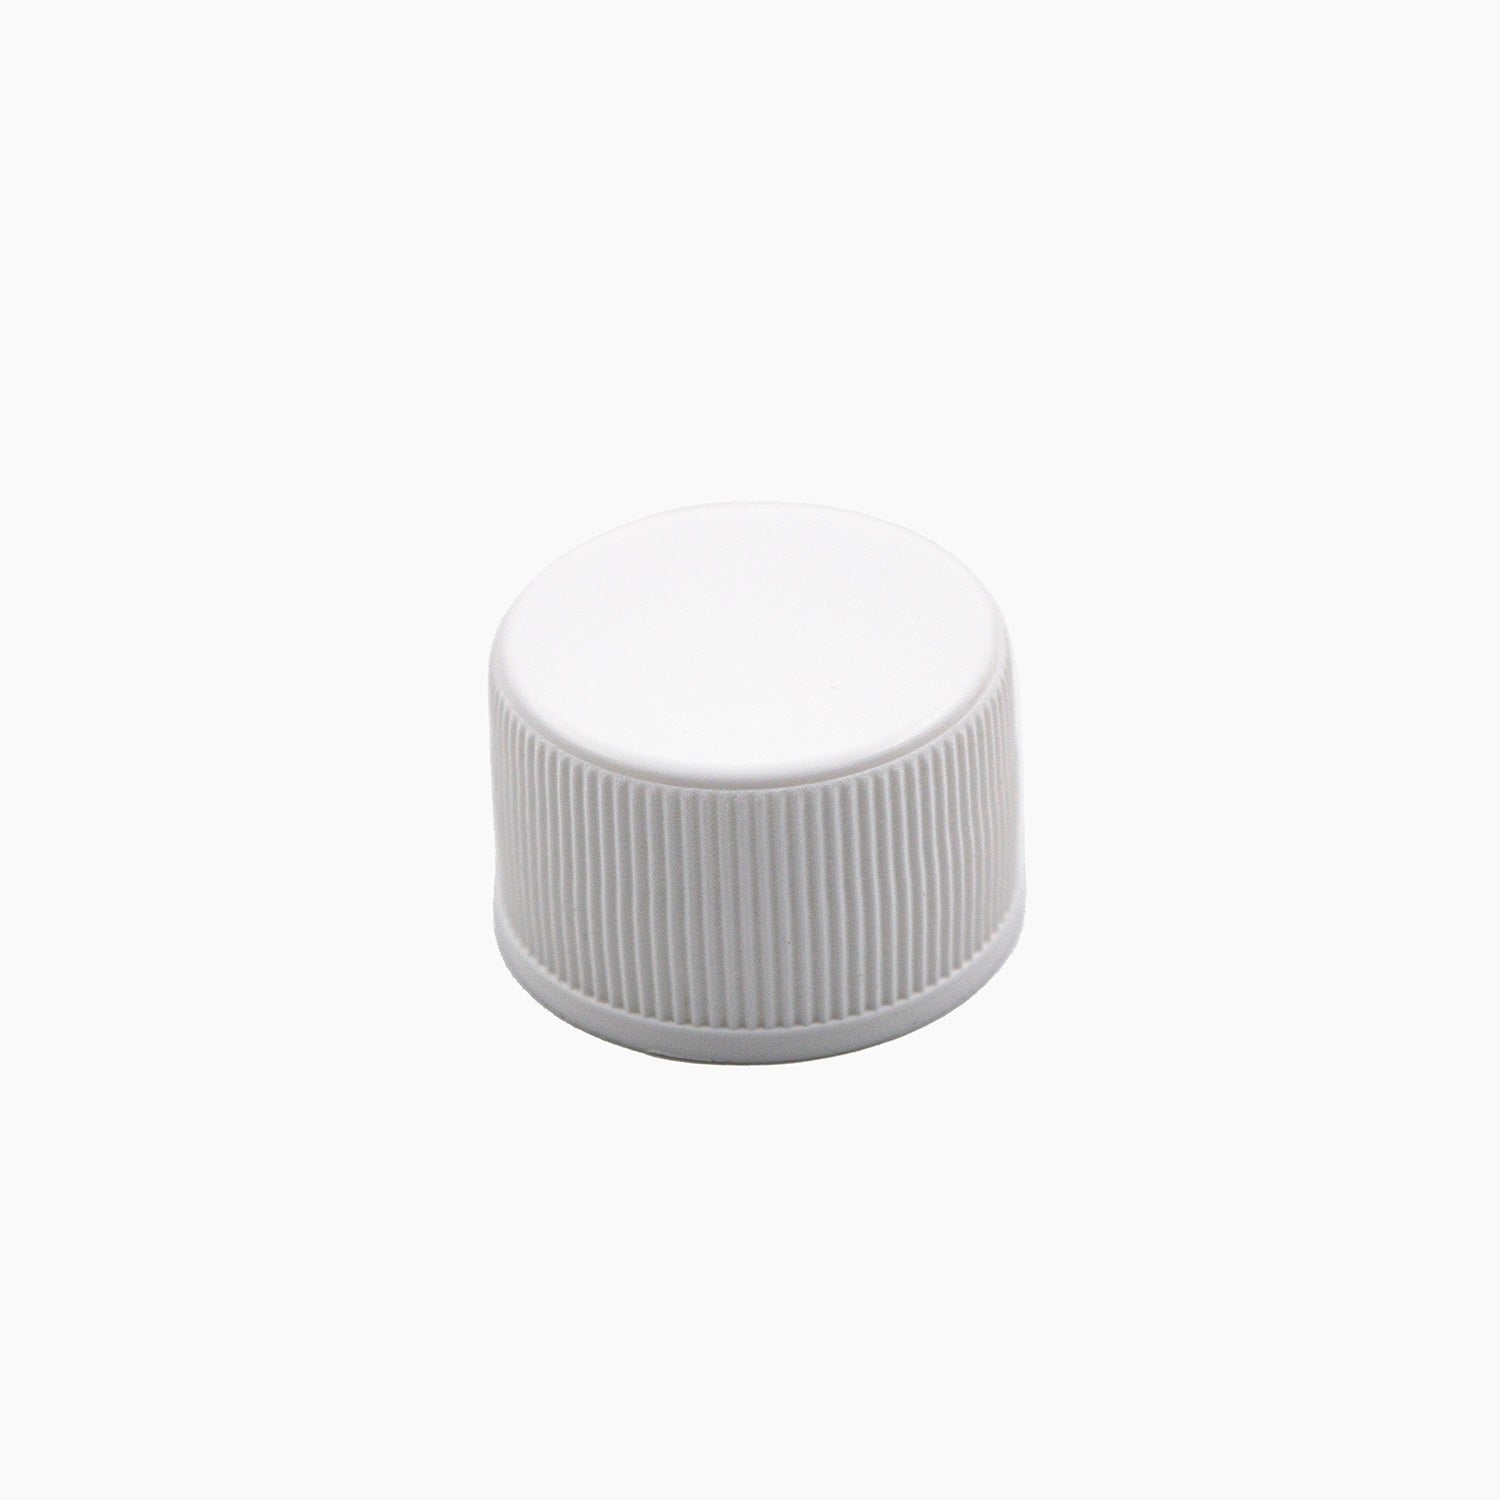 White 24mm Plastic Standard EPE Liner Bottle Cap On White Background | Brightpack Closures And Accessories